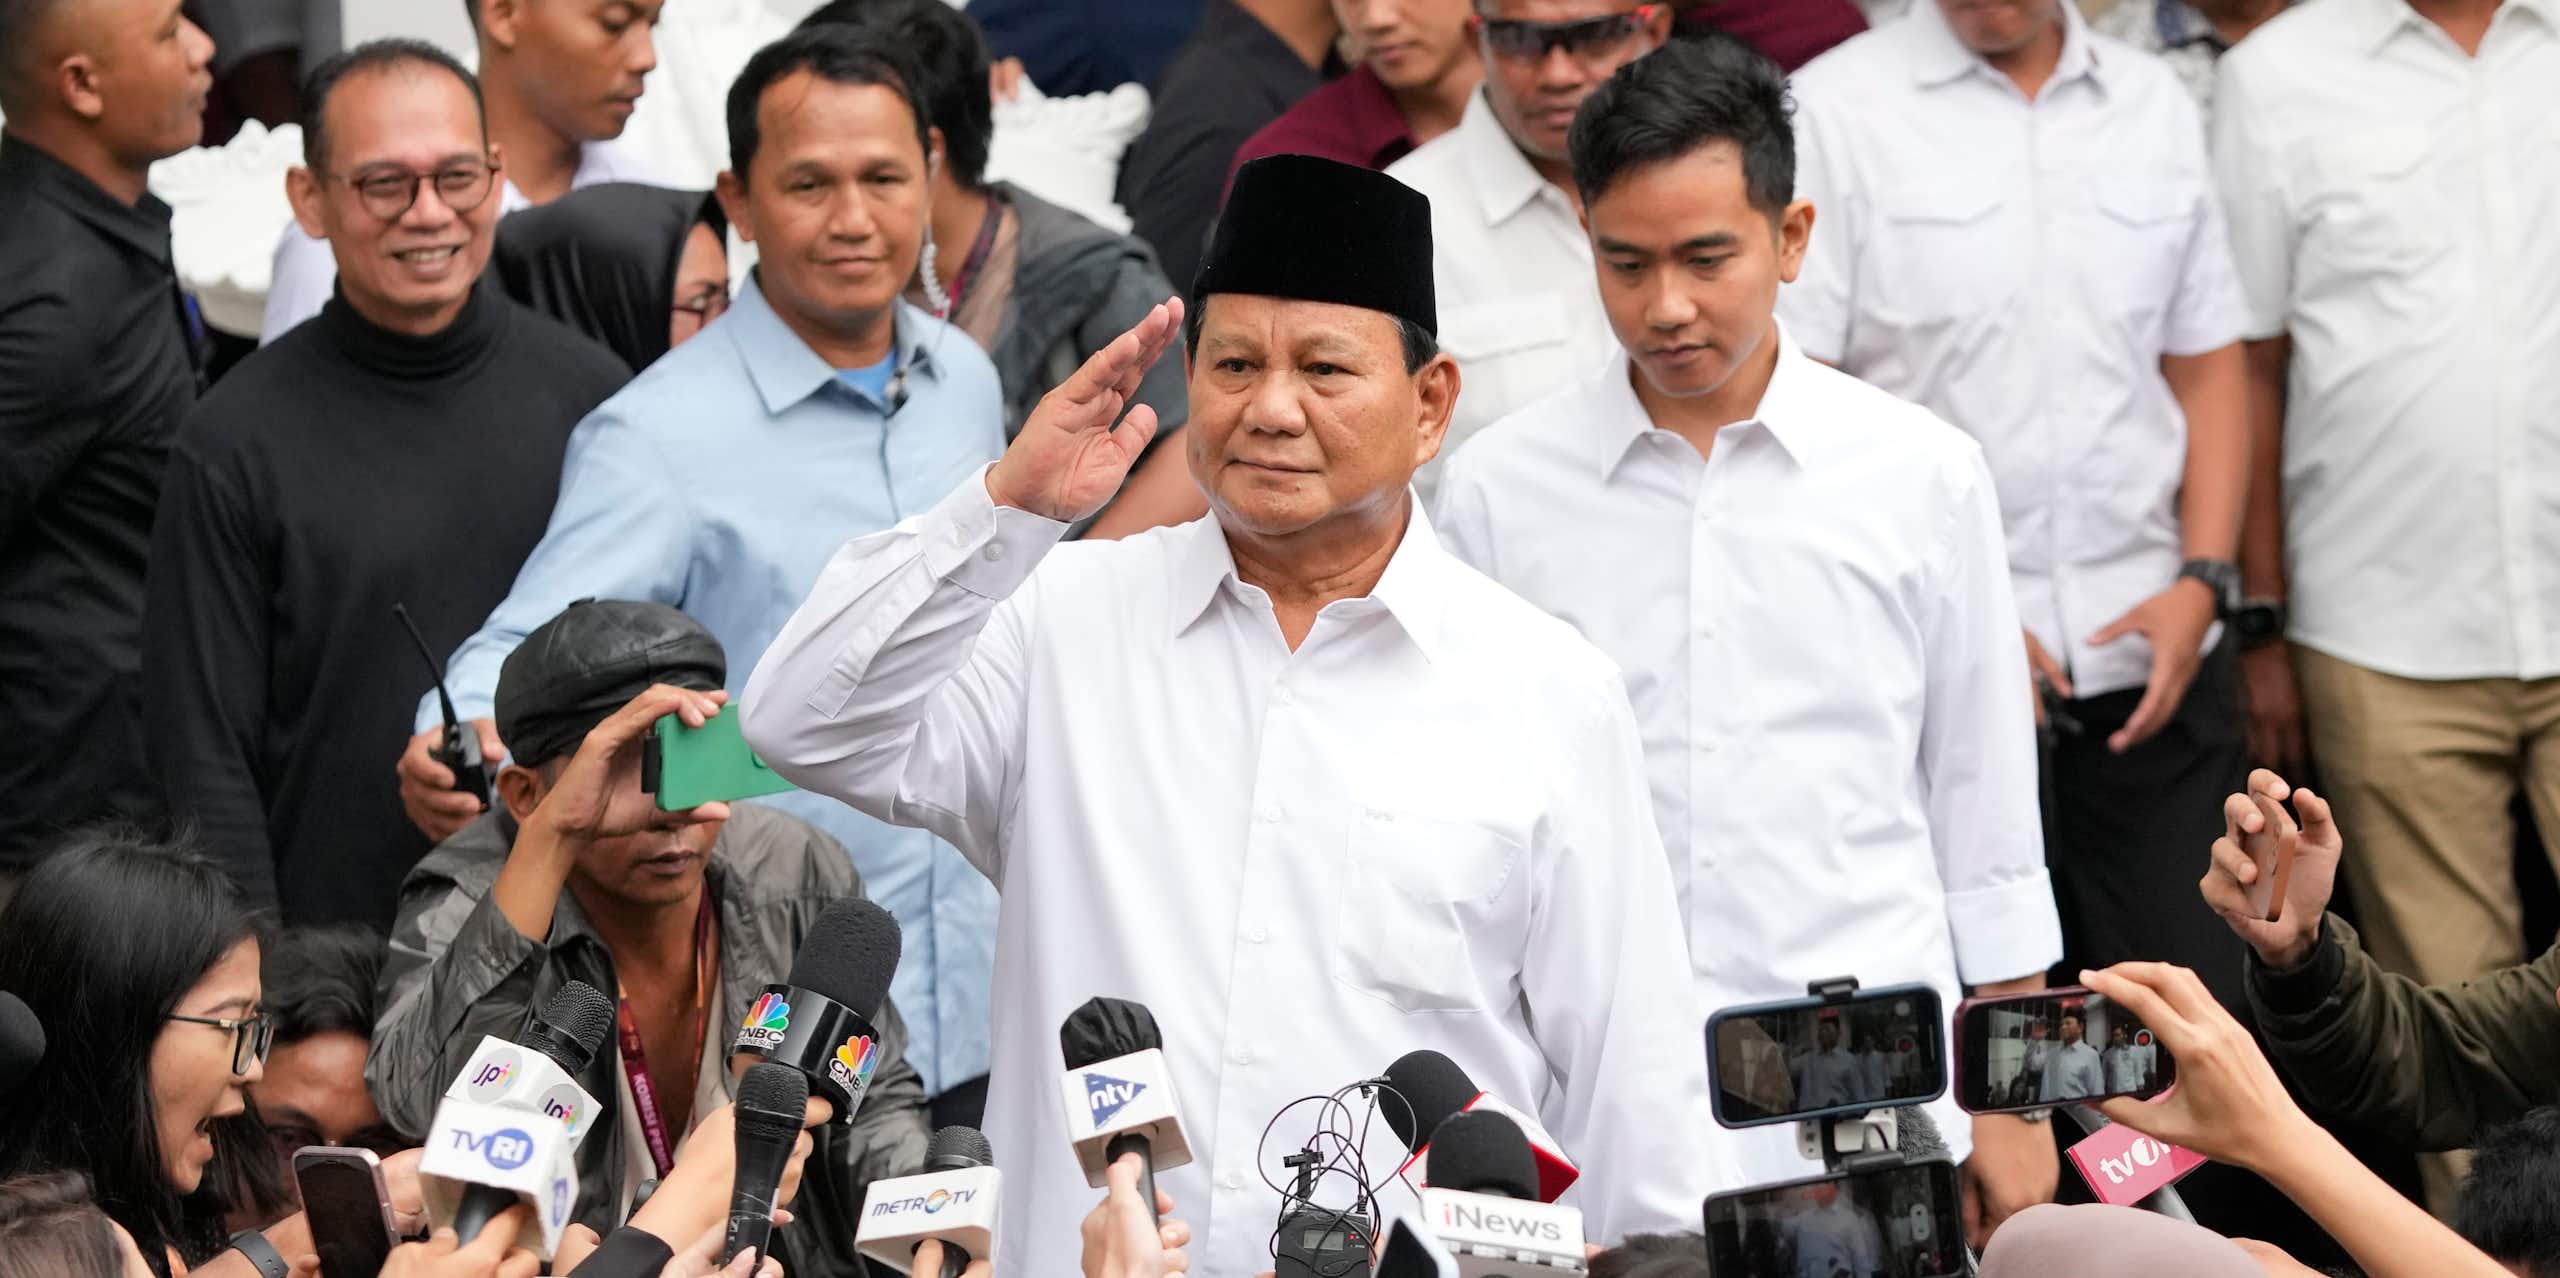 He won Indonesia’s election in a landslide. Now, backroom meetings and horse-trading will determine whether Prabowo can govern